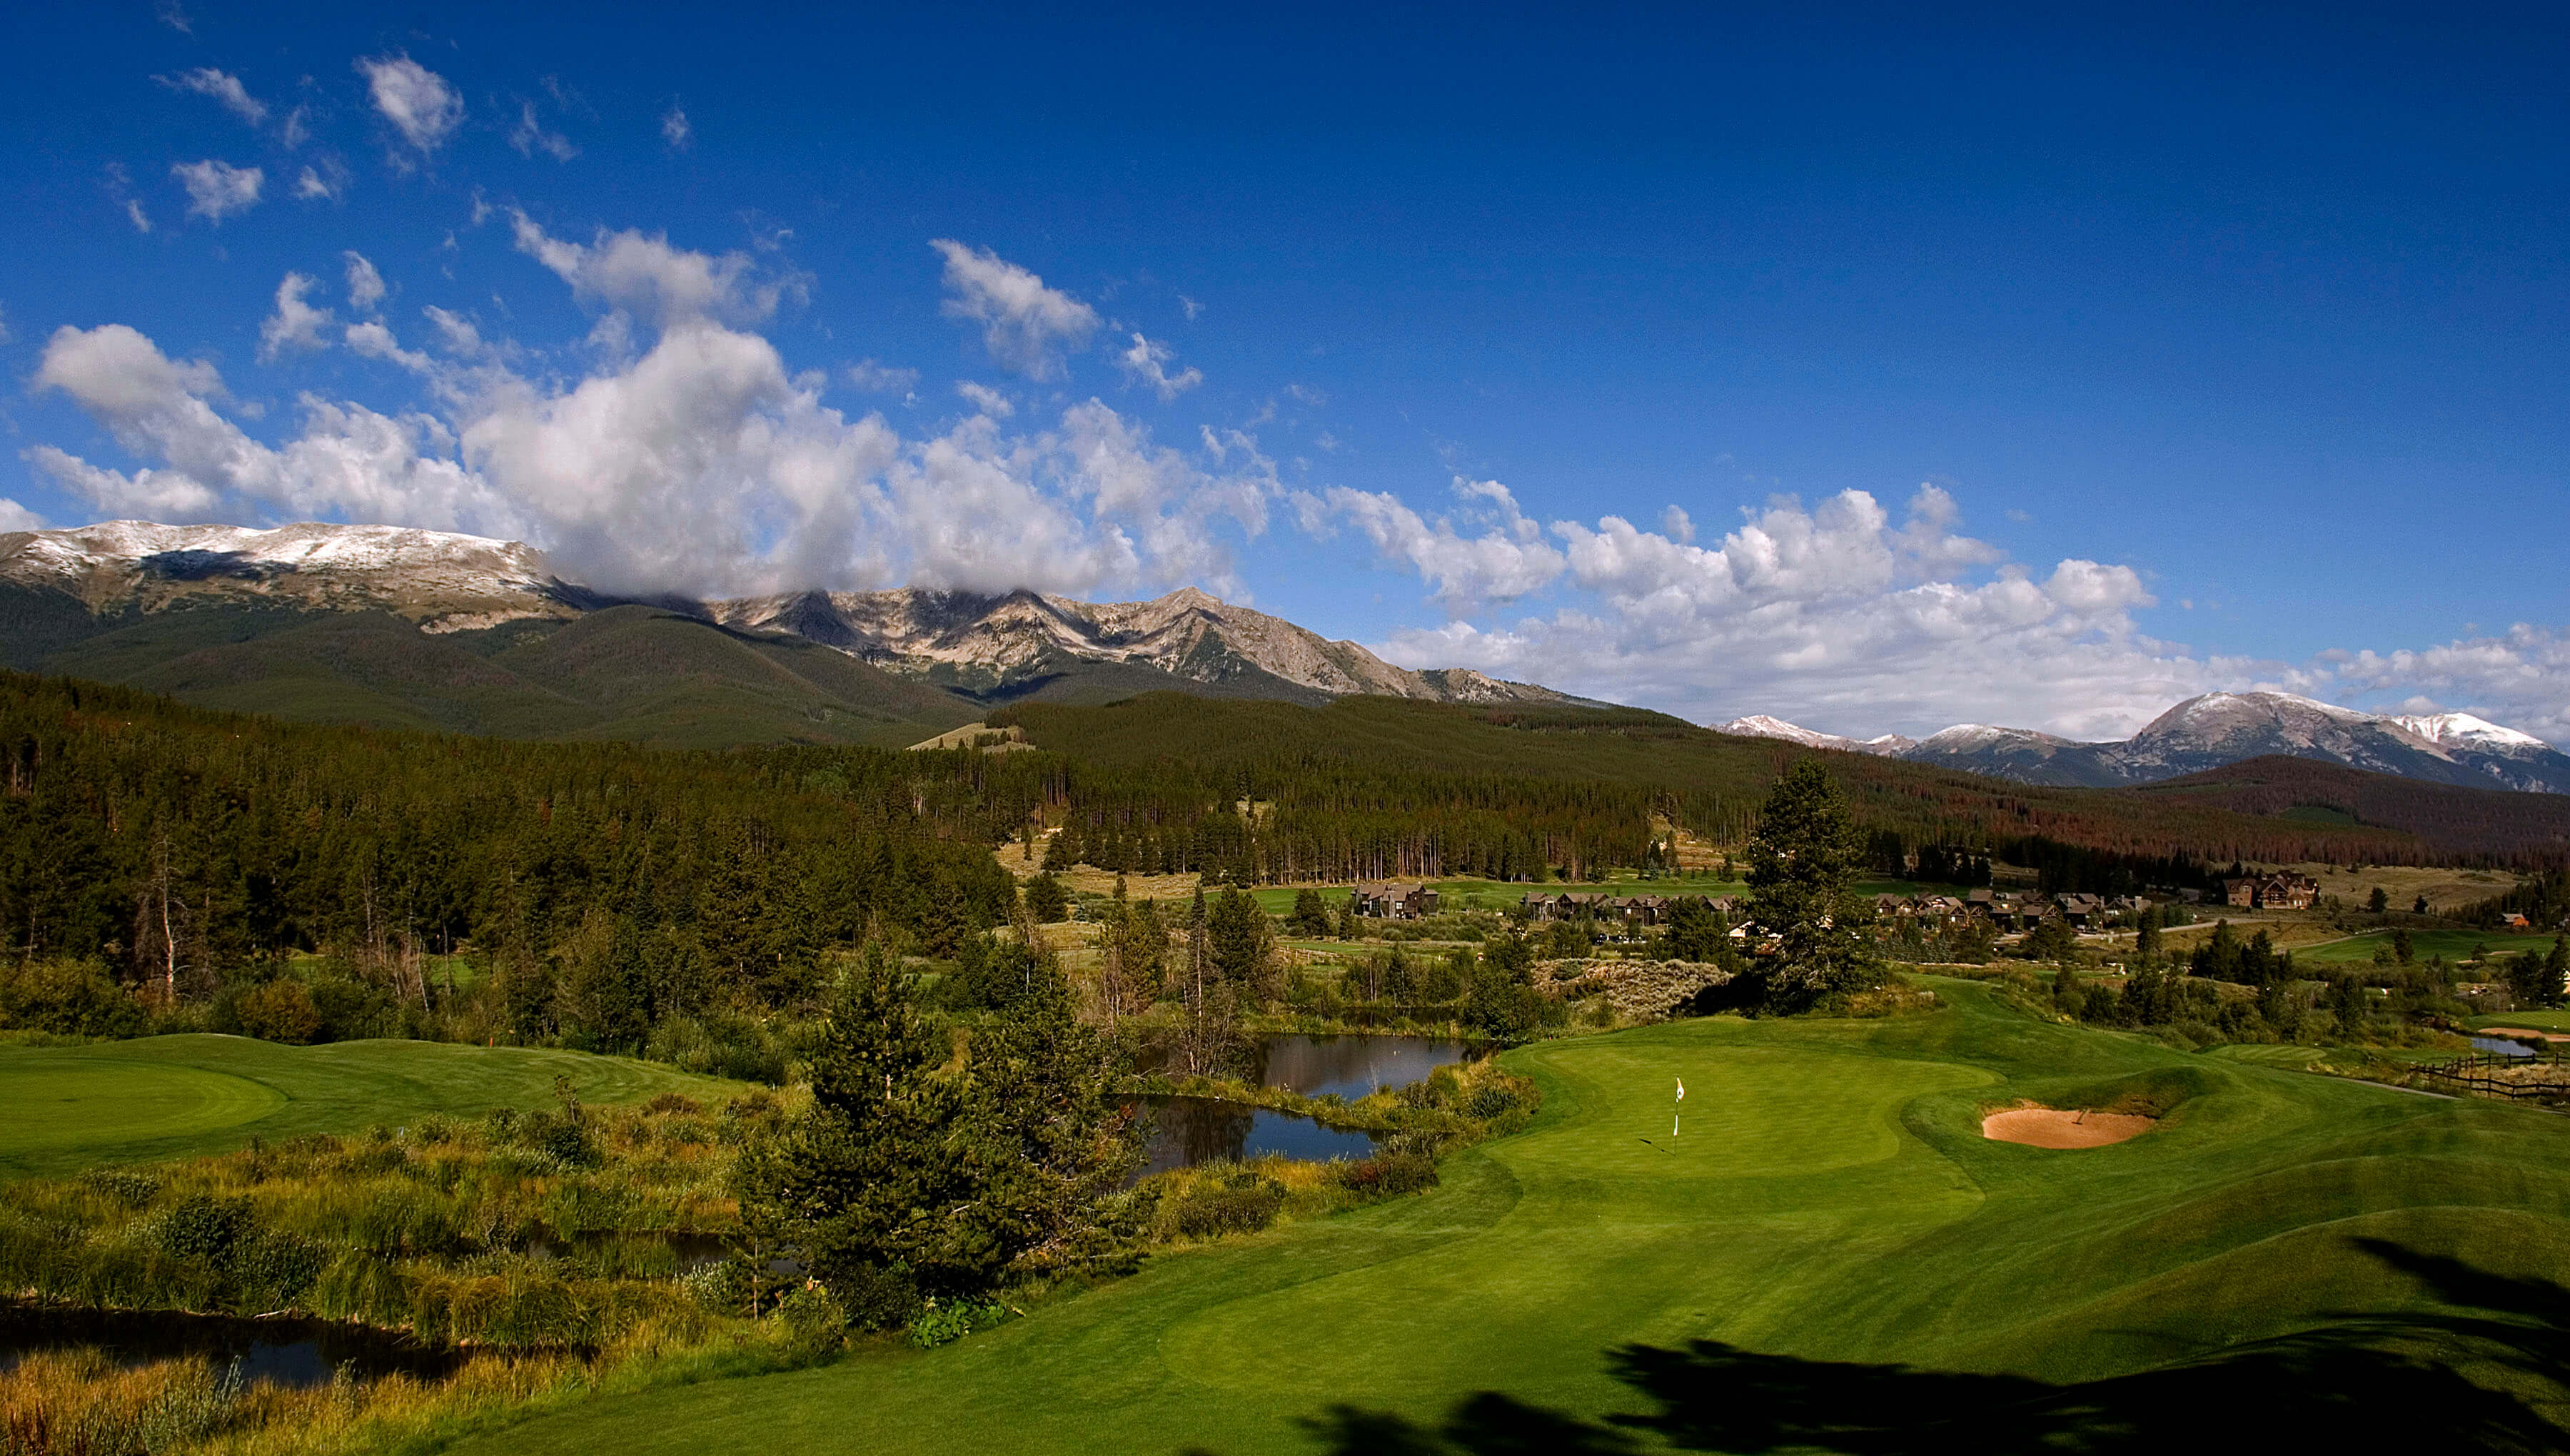 Overview of Hole 9 at Breckenridge's Golf Club Beaver Course